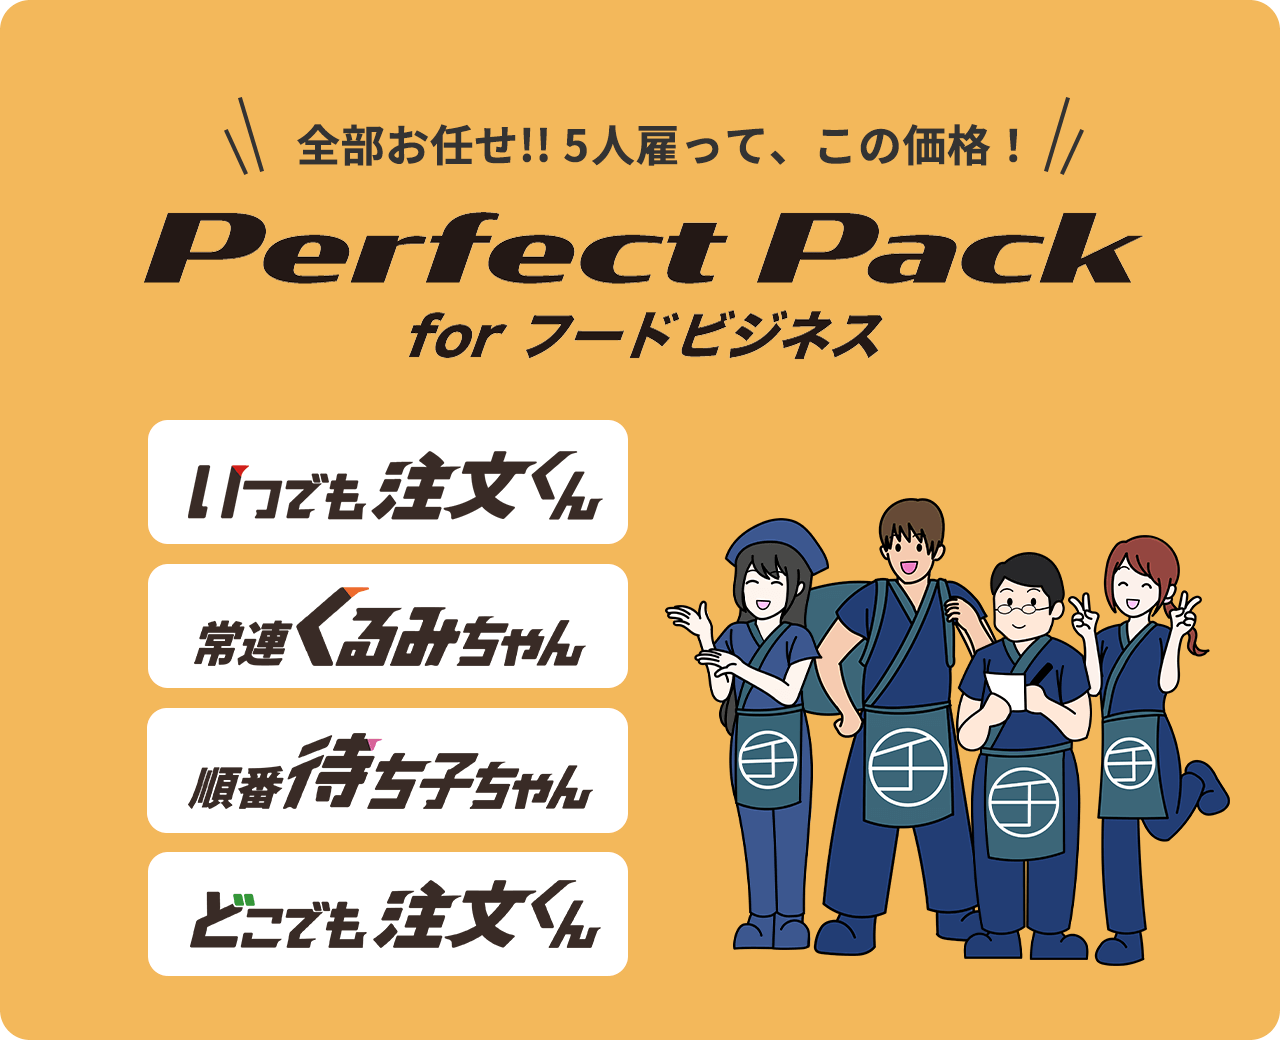 Perfect Pack forフードビジネス